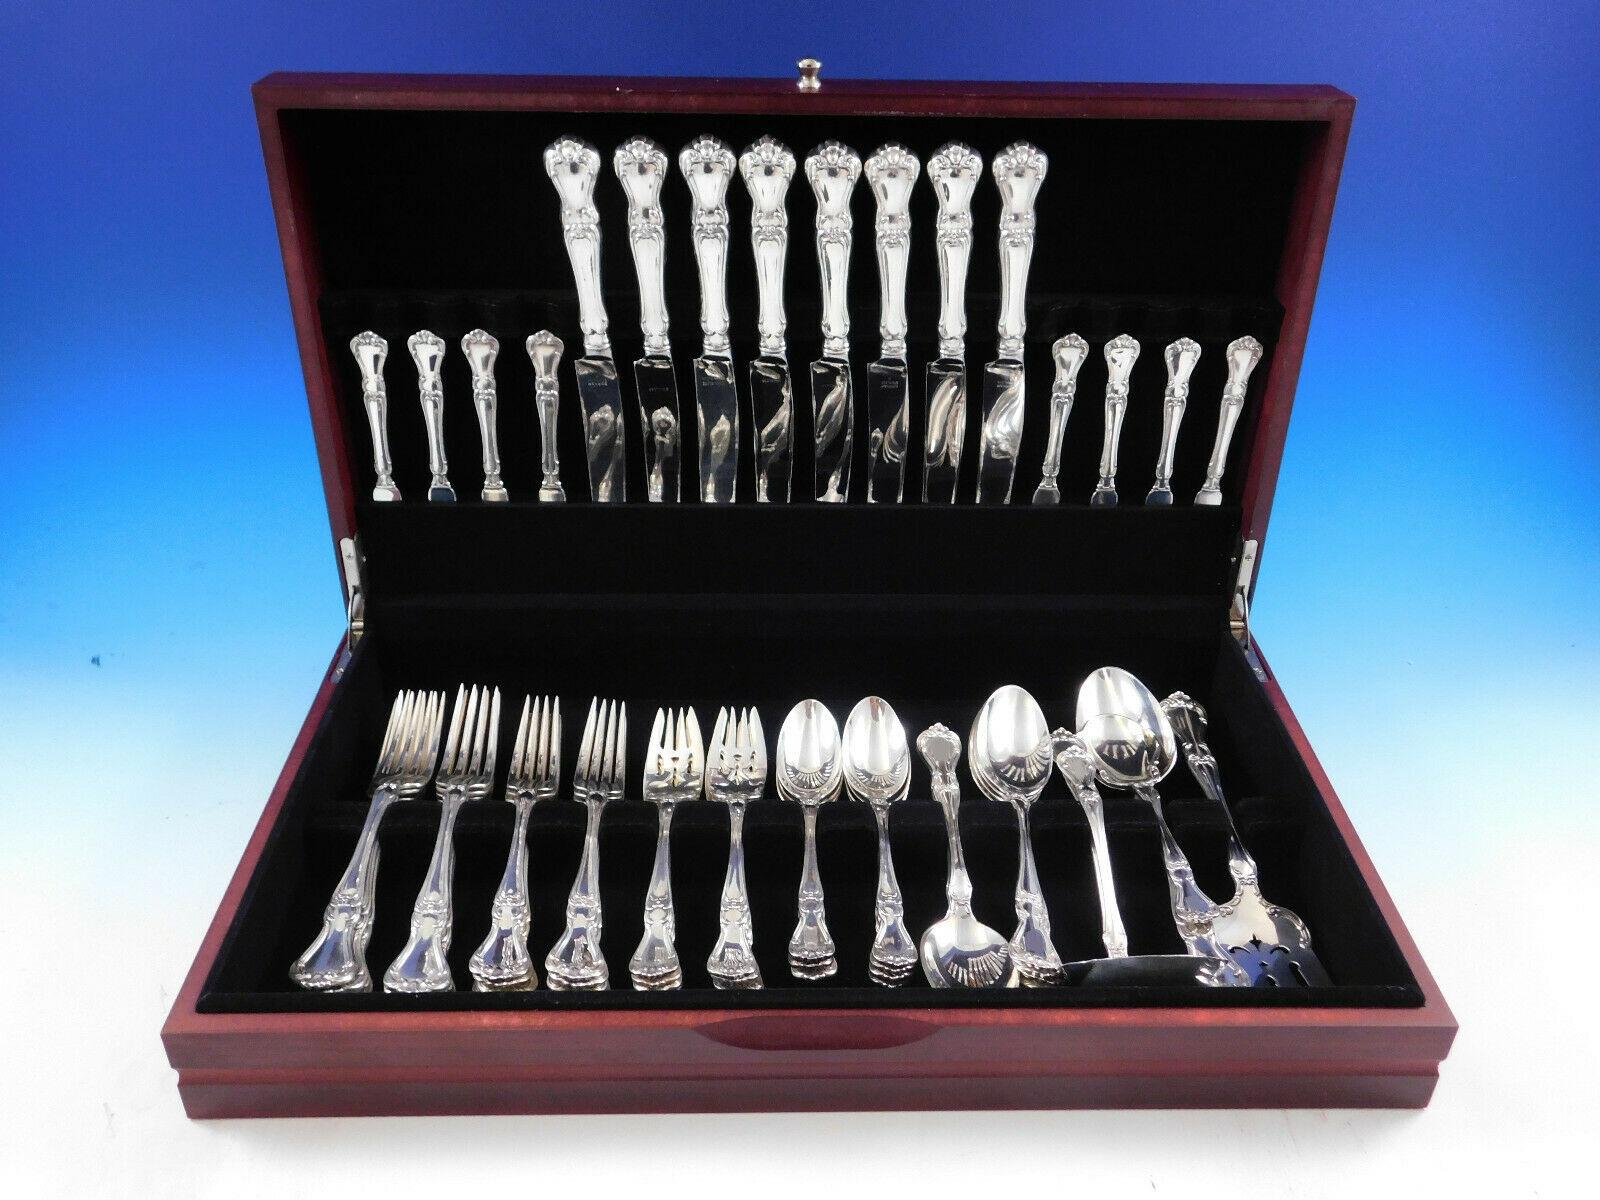 Dinner Size Buckingham by Gorham circa 1909 sterling silver Flatware set - 61 pieces. This set includes:
8 dinner size knives, 9 1/2